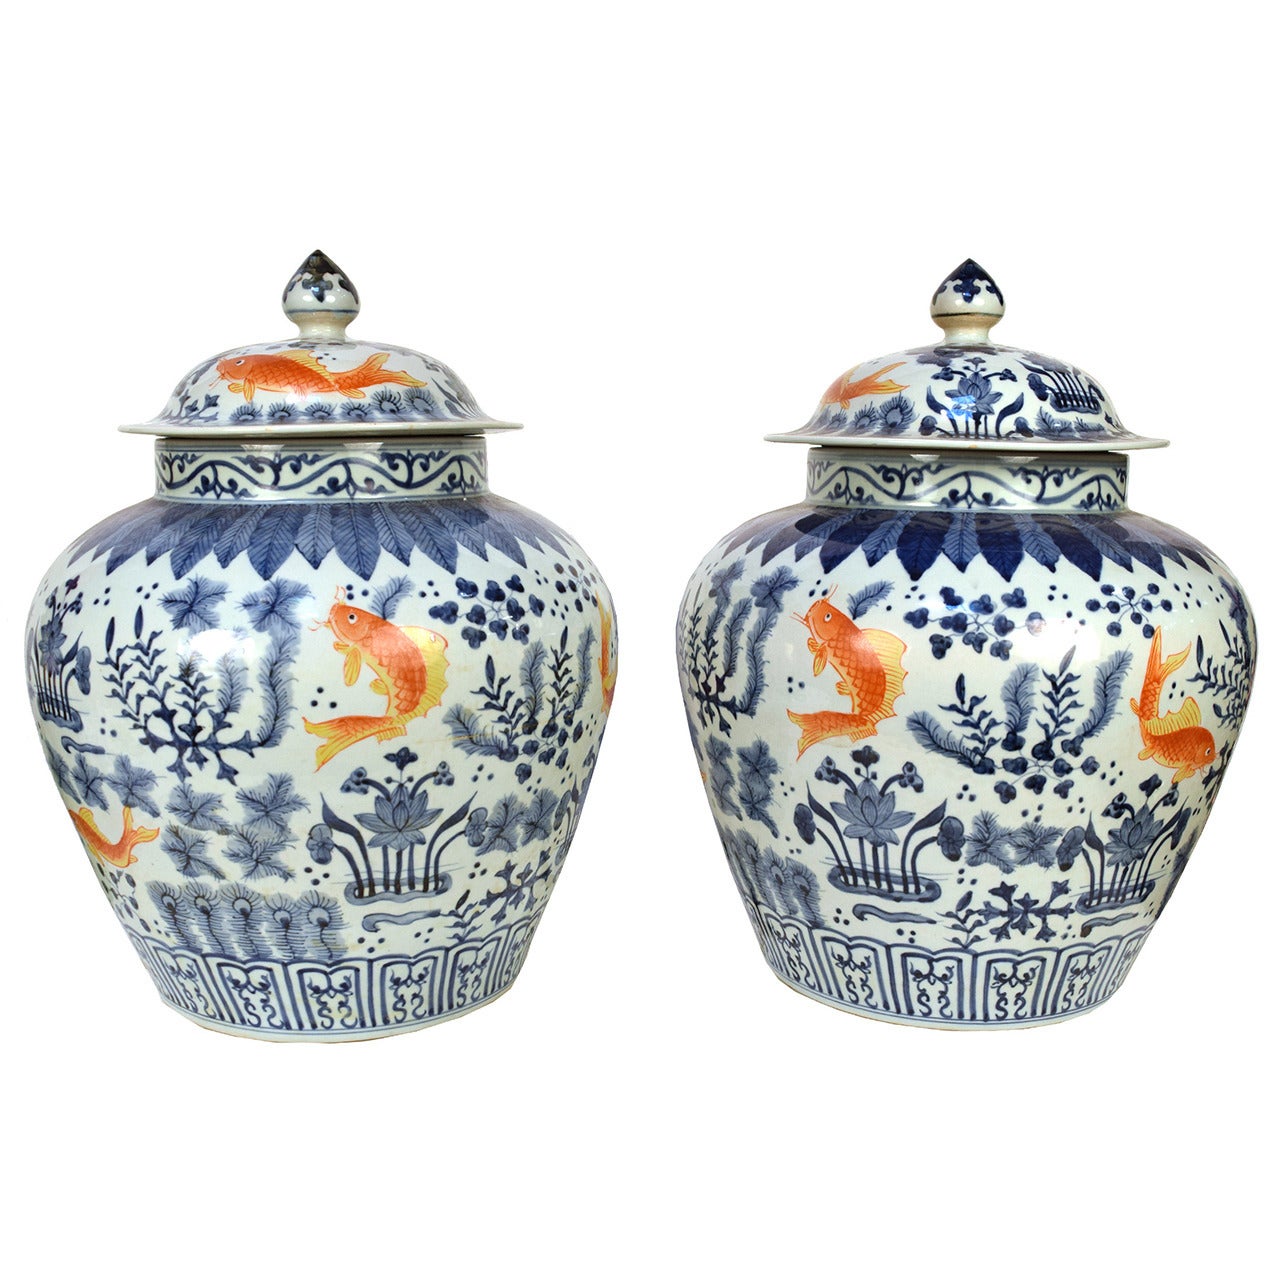 Pair of Chinese Blue and White Covered Jar with Fish and Floral Motif